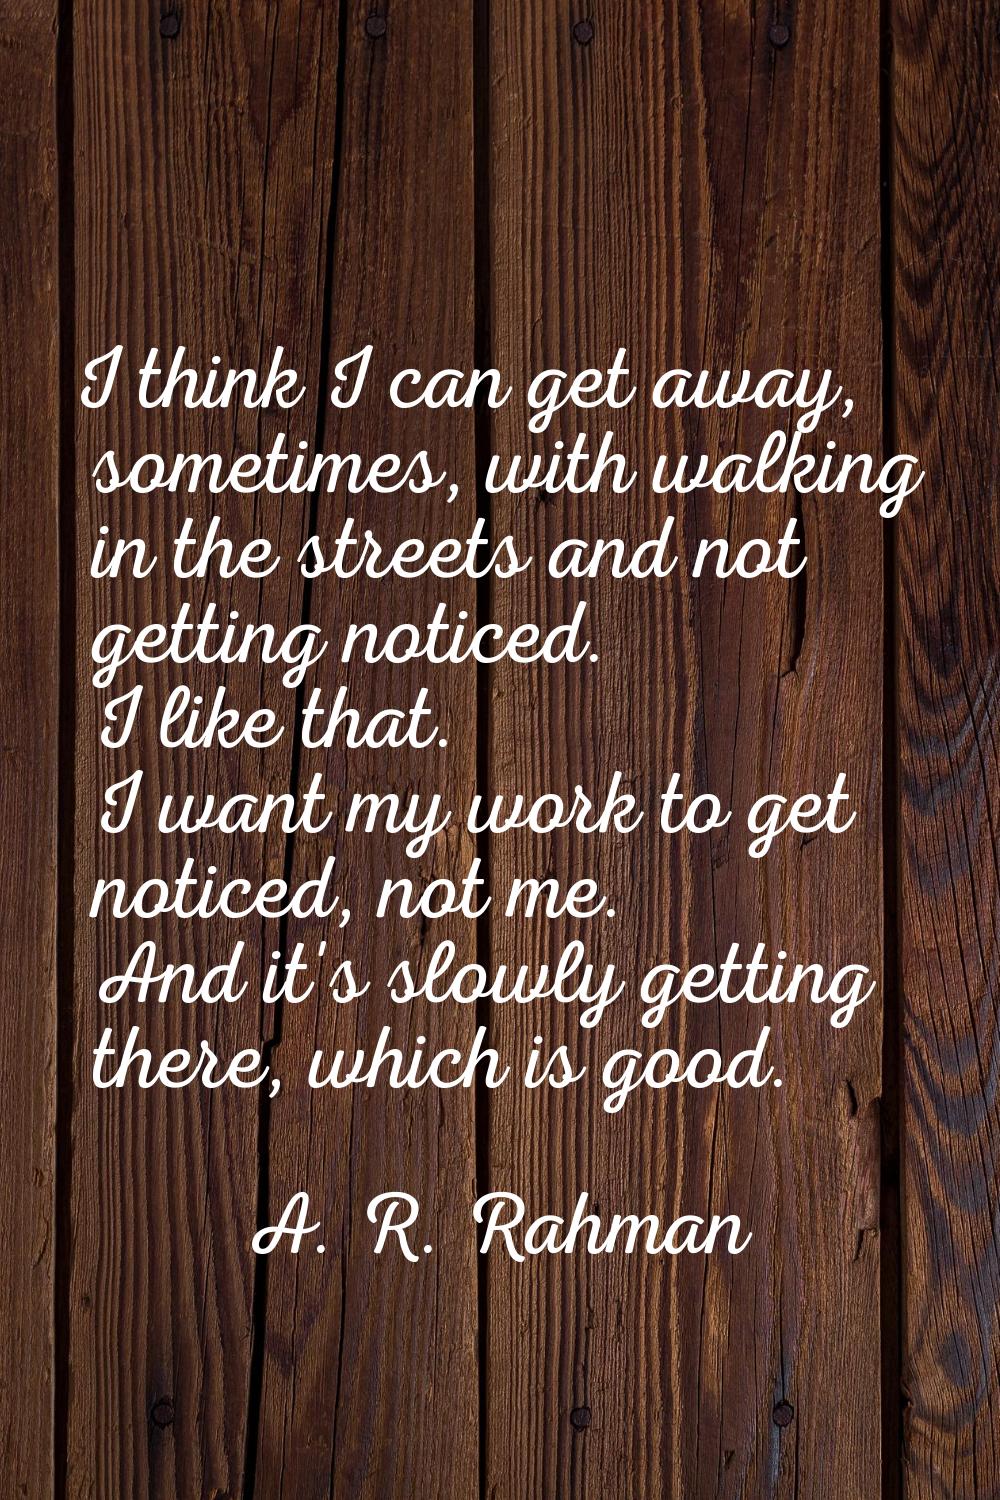 I think I can get away, sometimes, with walking in the streets and not getting noticed. I like that